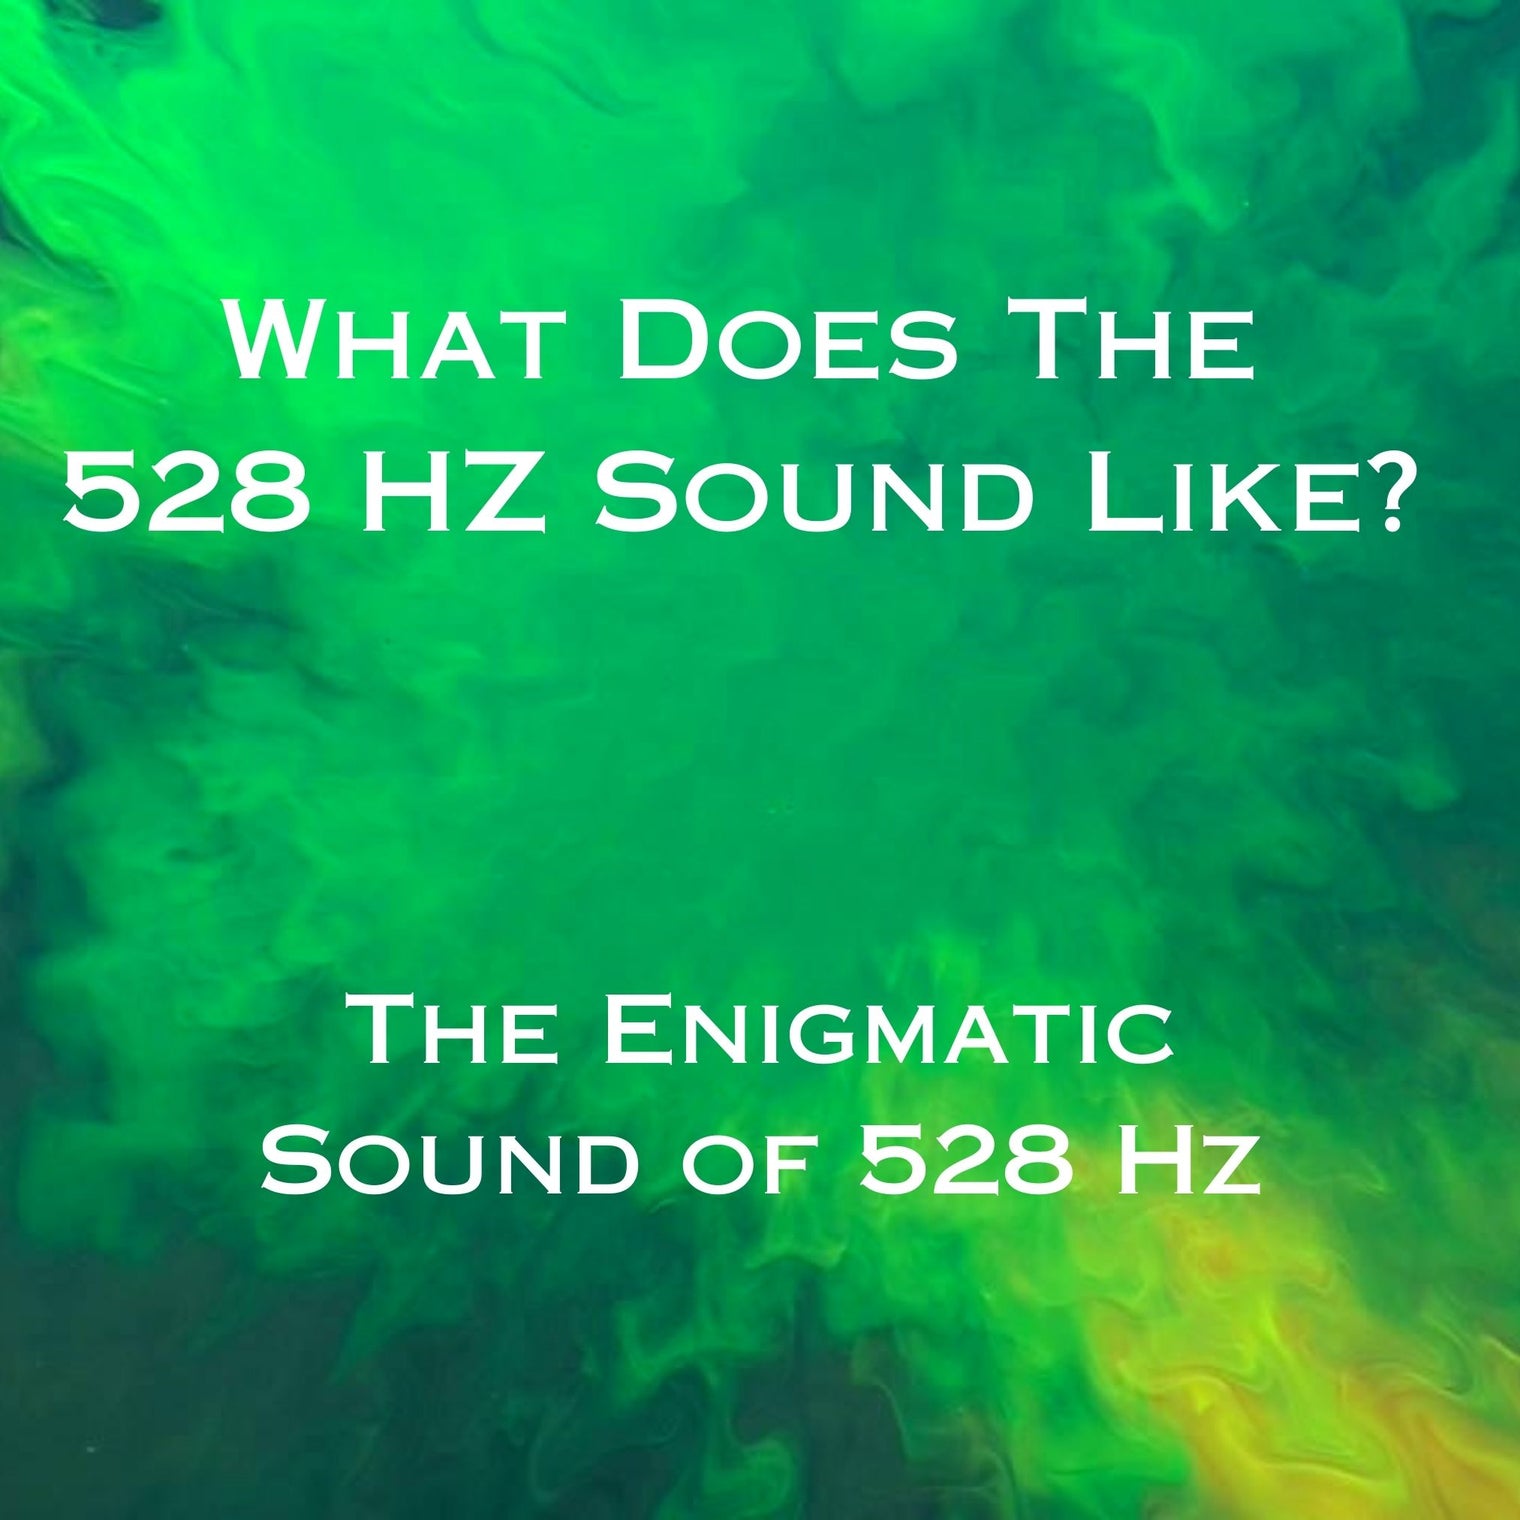 What Does The 528 Hz Sound Like? The Enigmatic Sound of 528 Hz